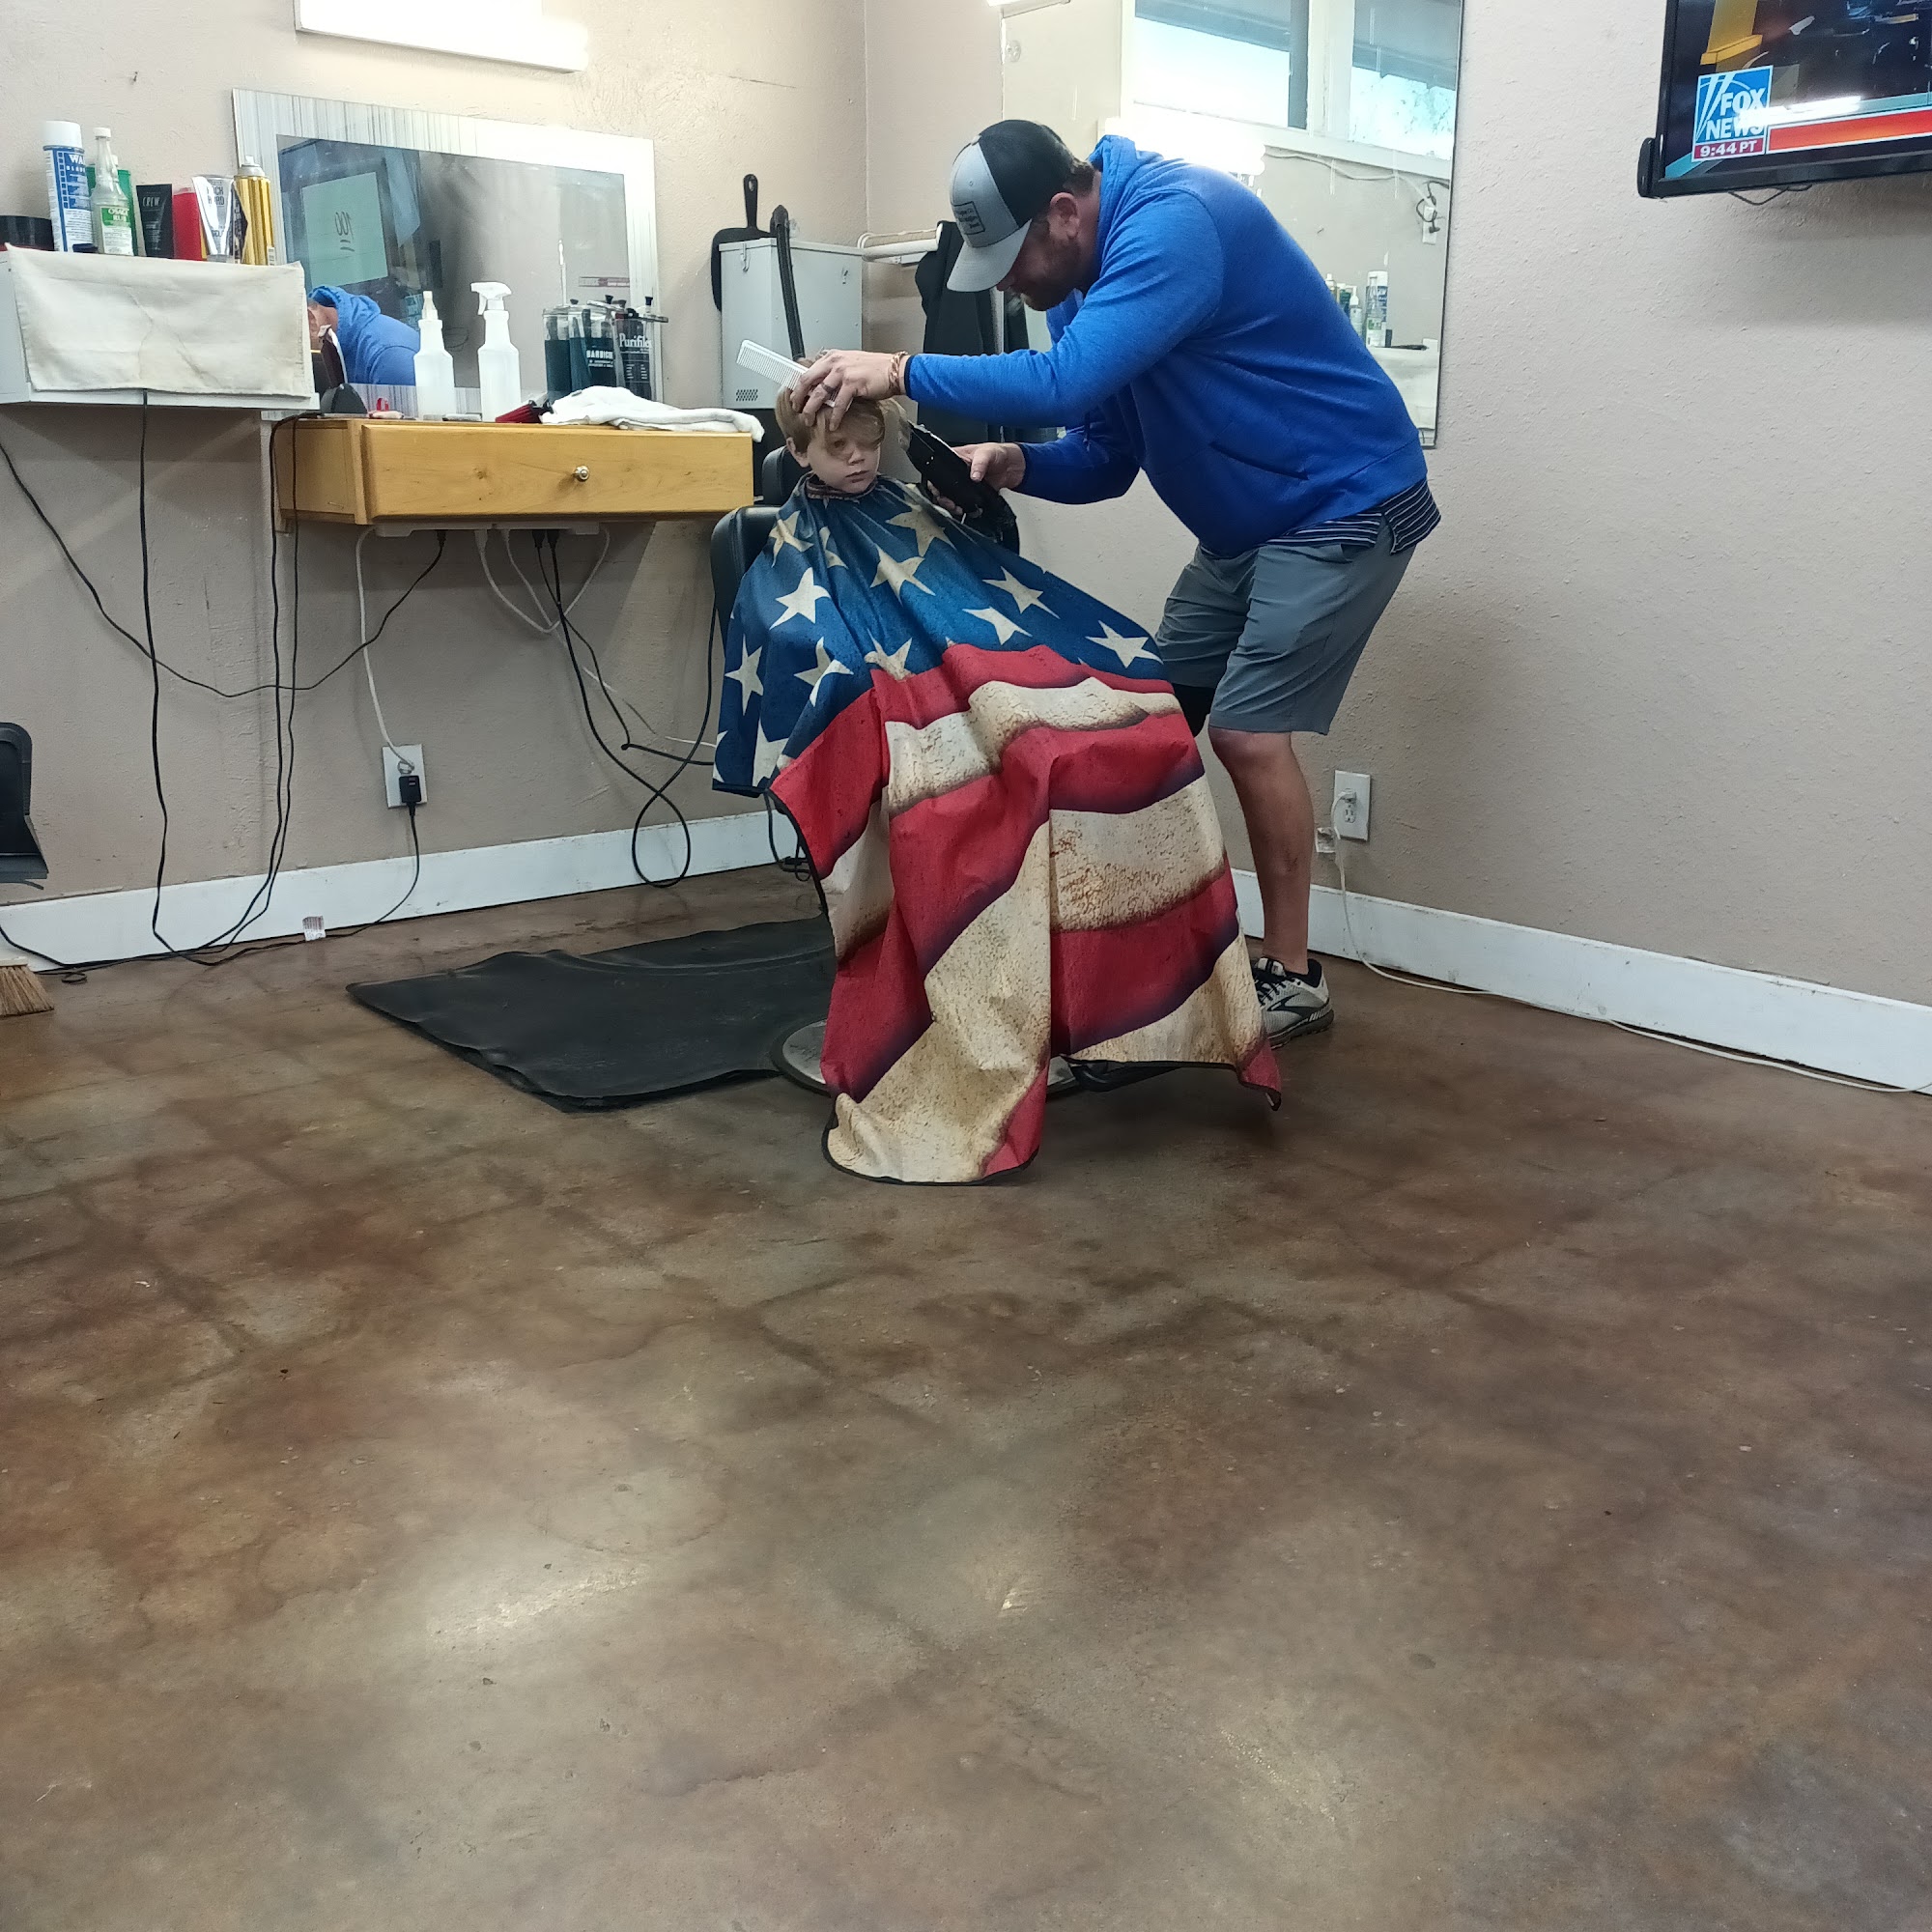 The Barber Shop 1503 TX-59, Bowie Texas 76230